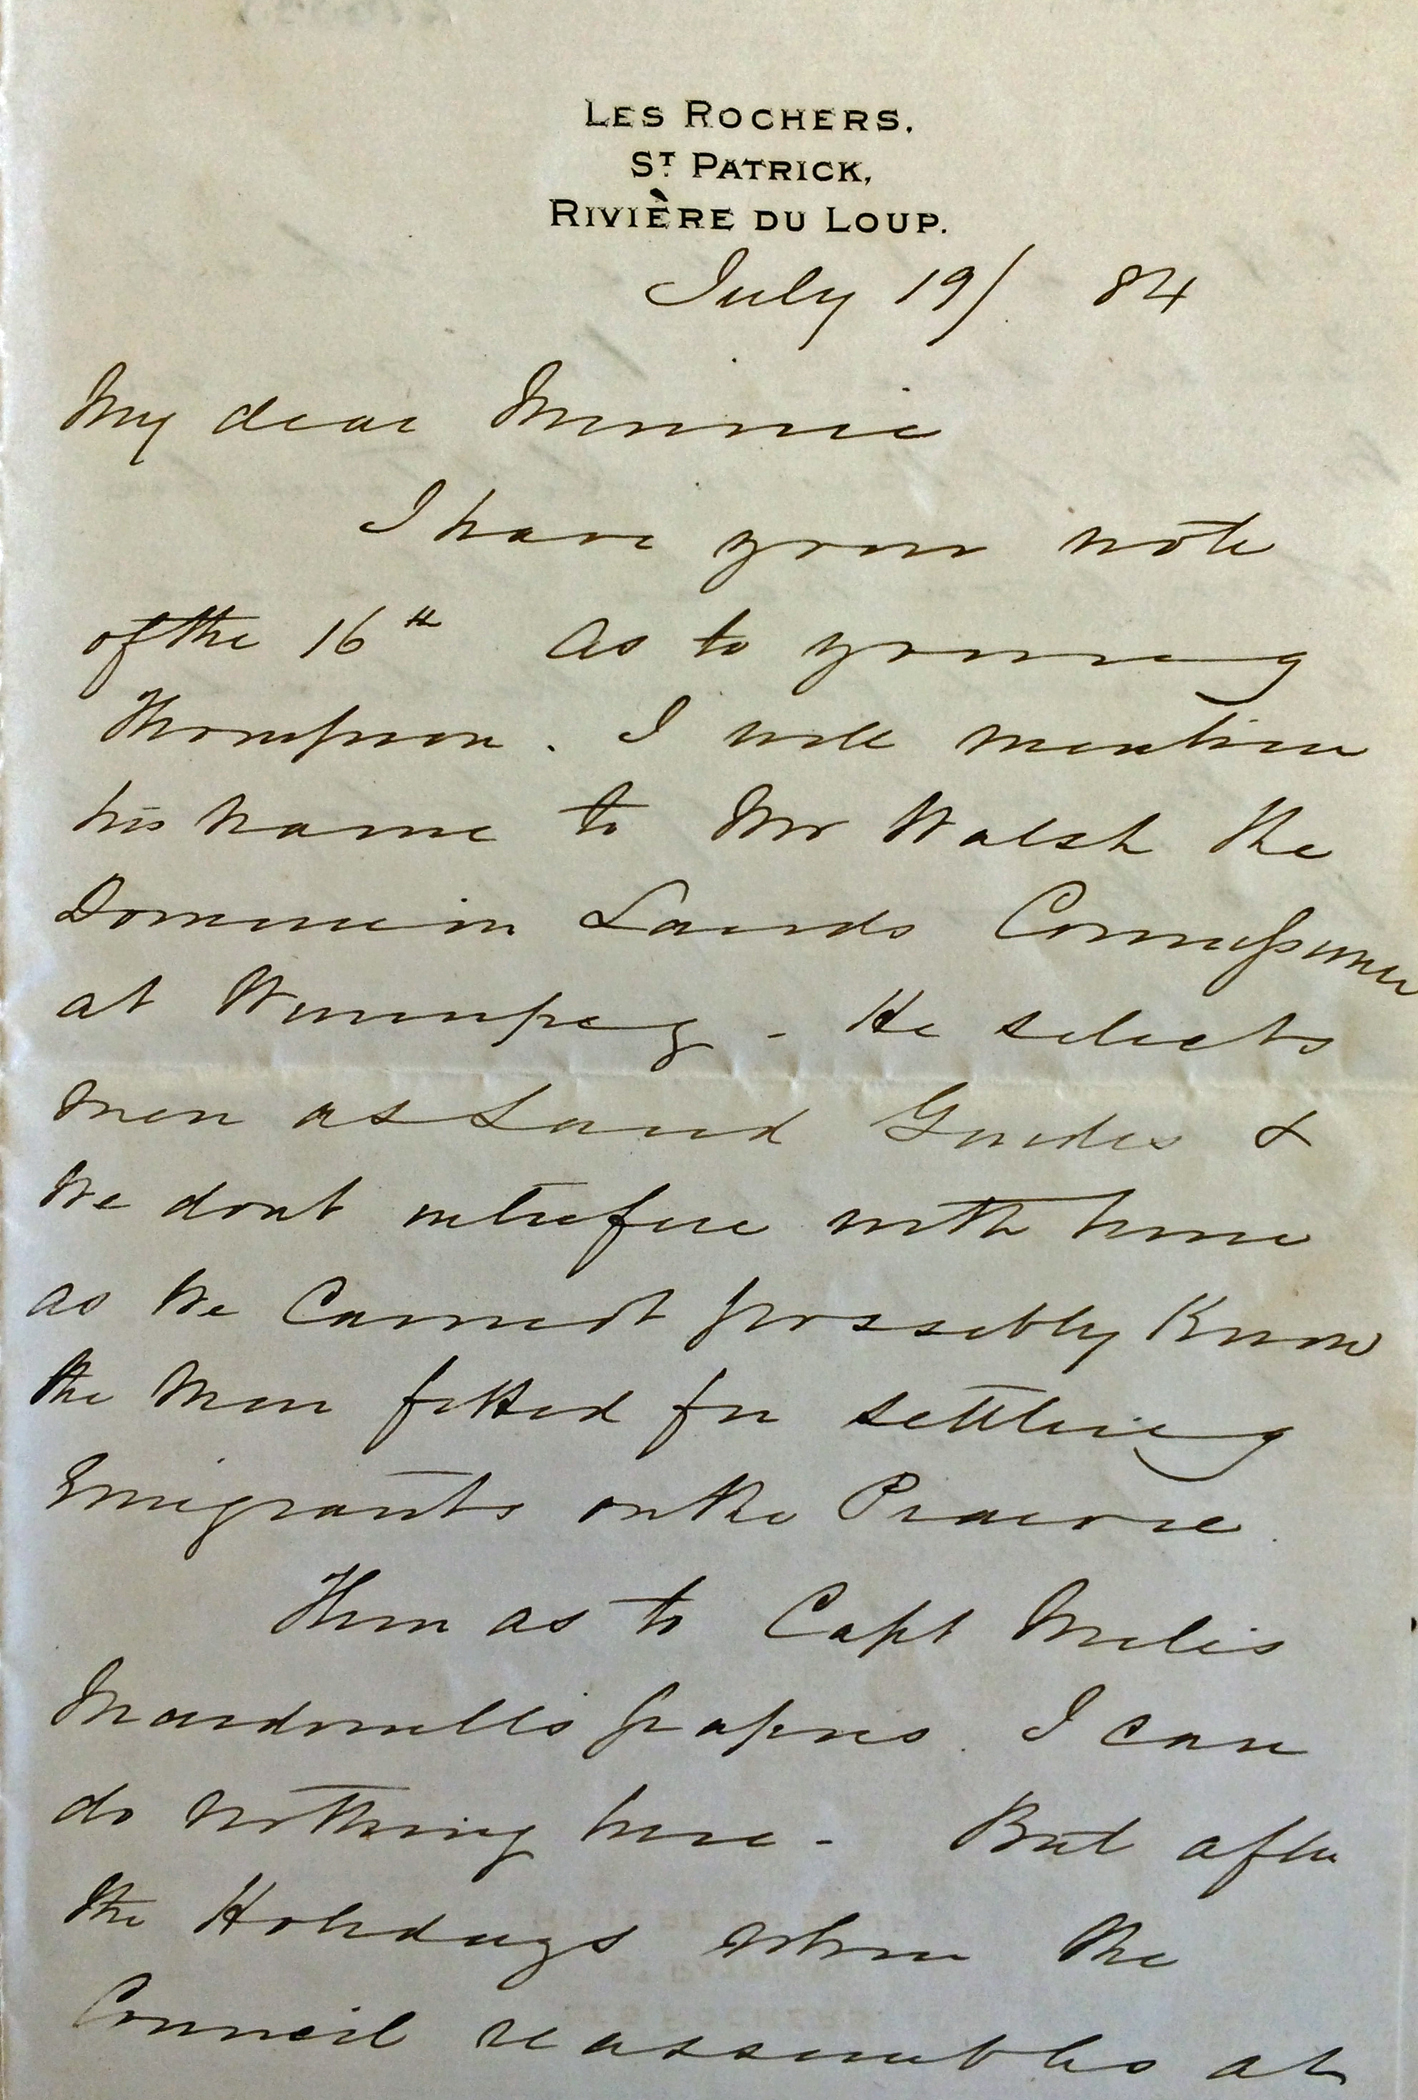 A photograph of a hand-written letter dated July 19, 1884.